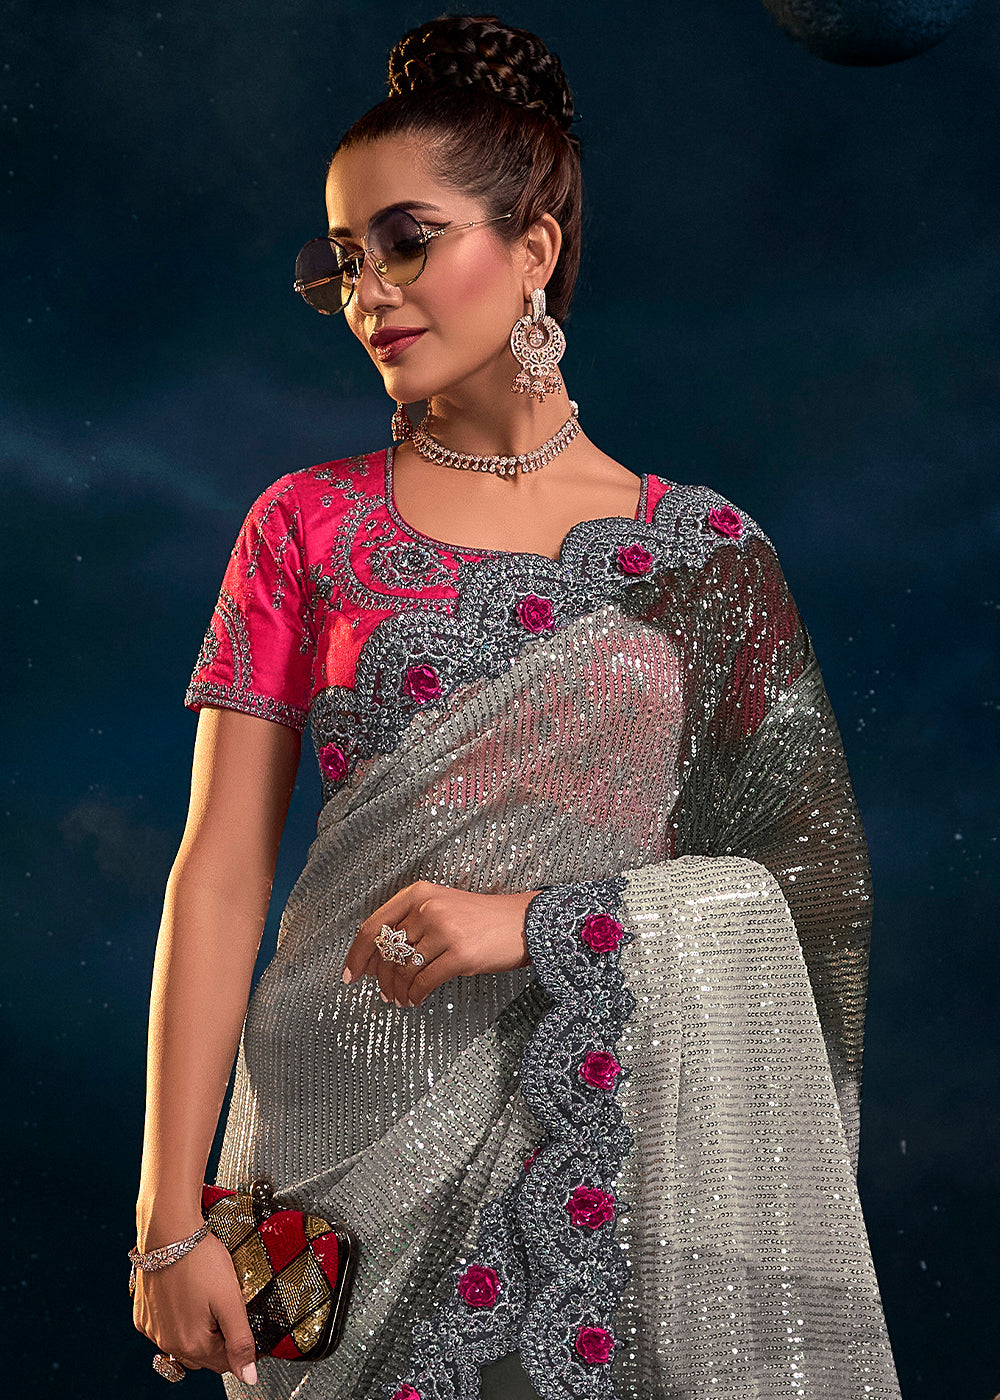 Graceful Pink and Grey Embroidered Saree with Elegant Detailing